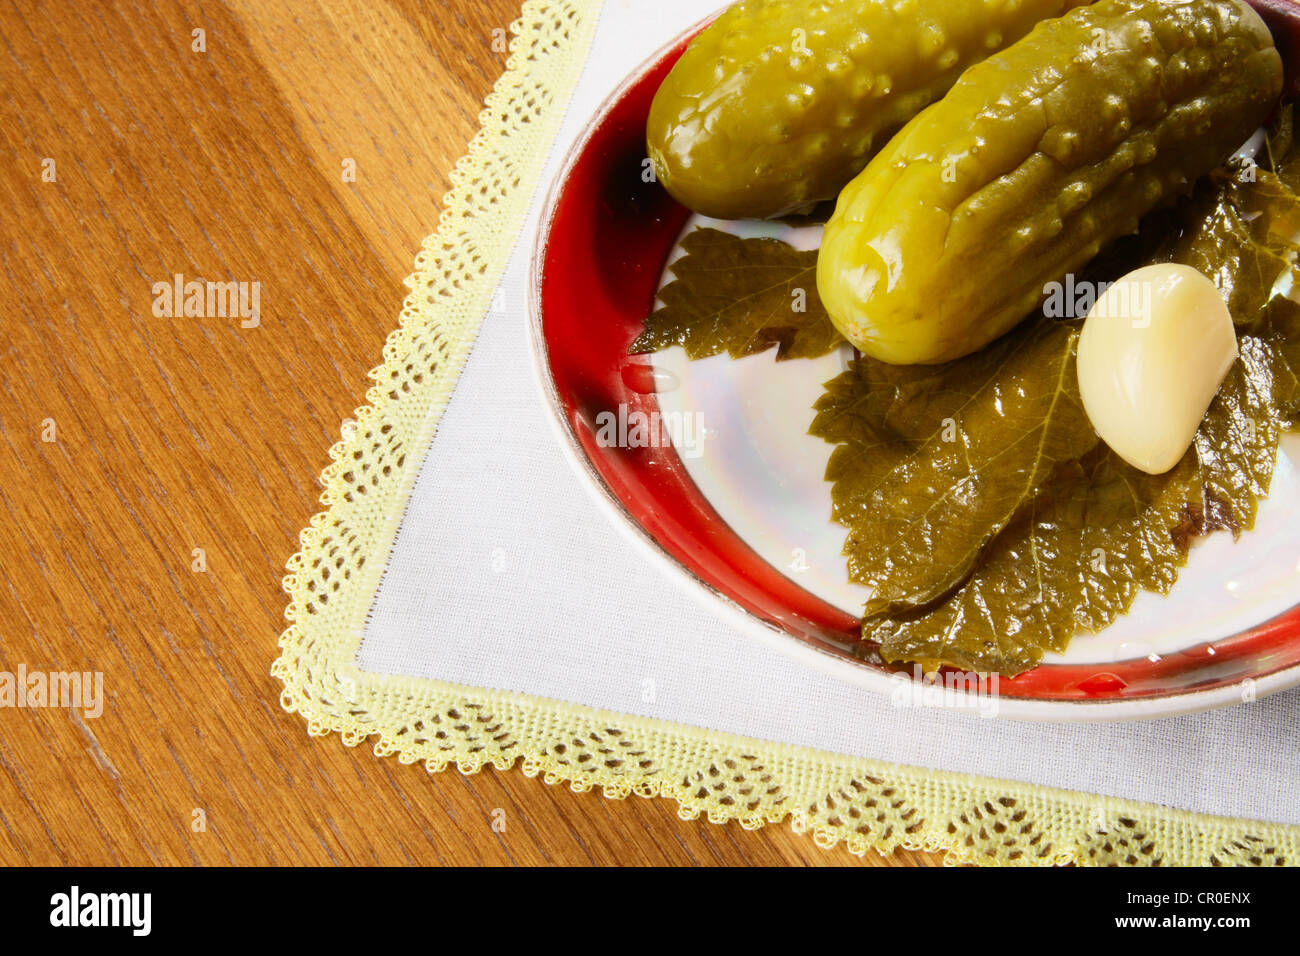 Plate with marinated cucumbers, garlic and leaf of currant Stock Photo